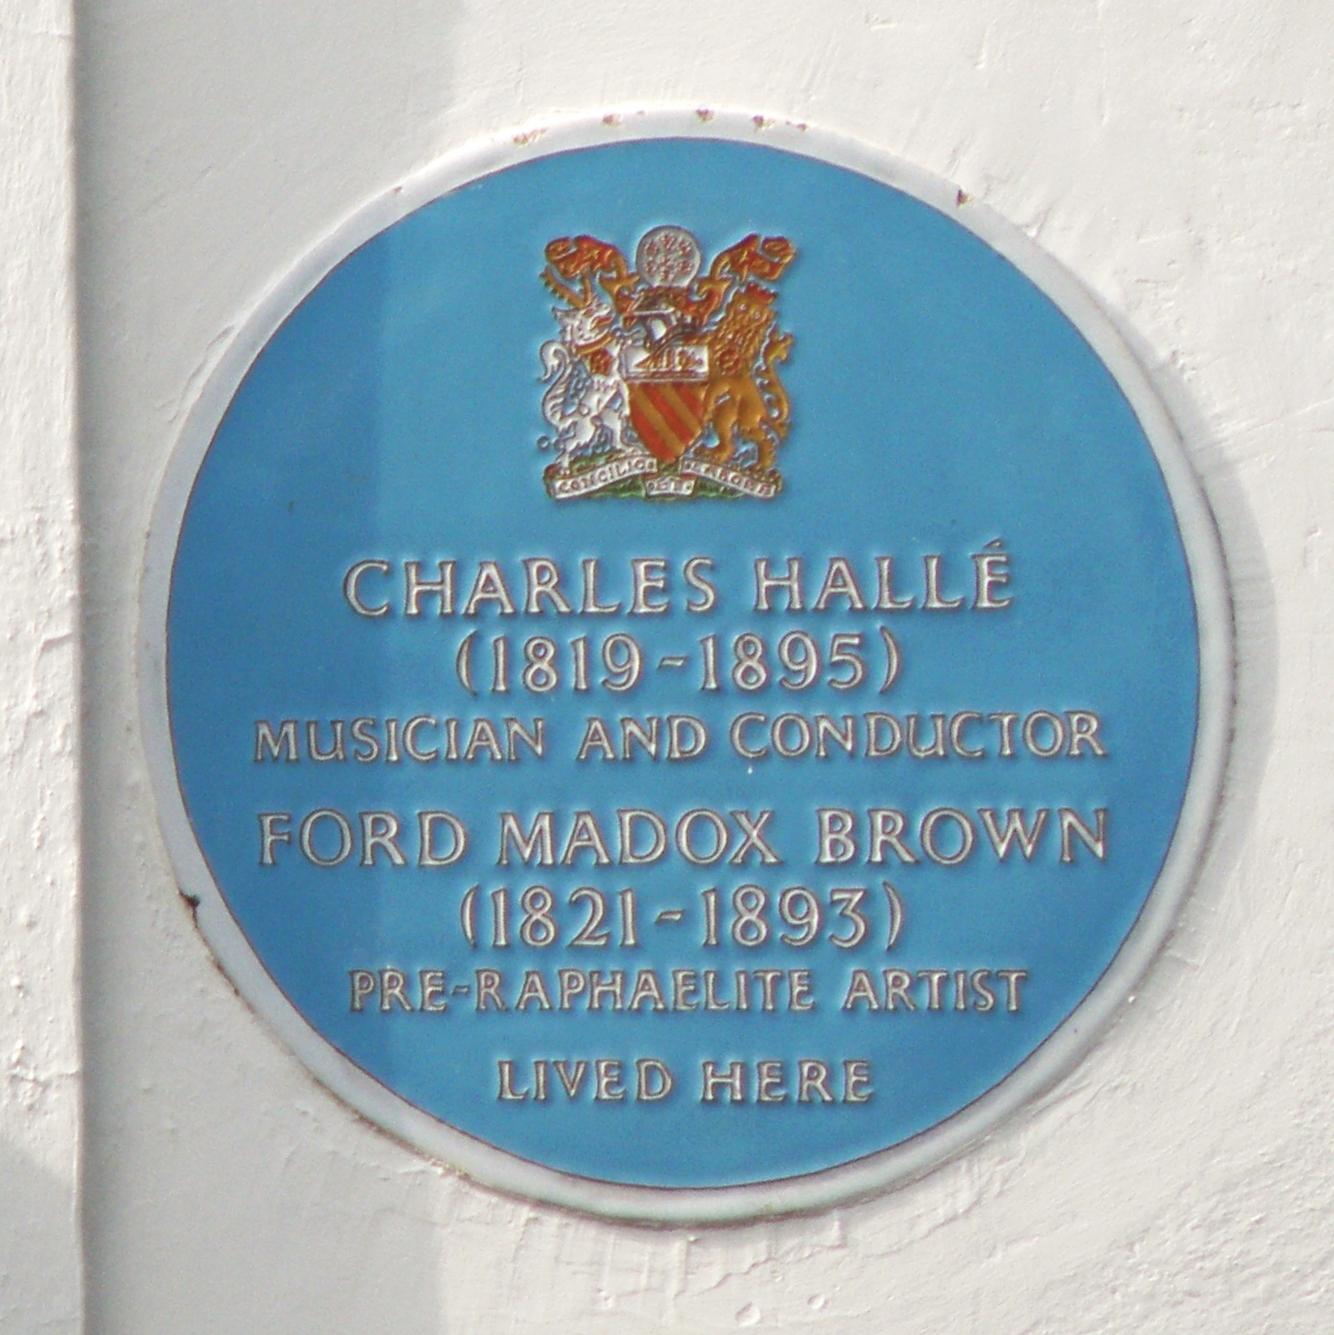 Charless Halle and Ford Madox Brown blue plaque in Manchester